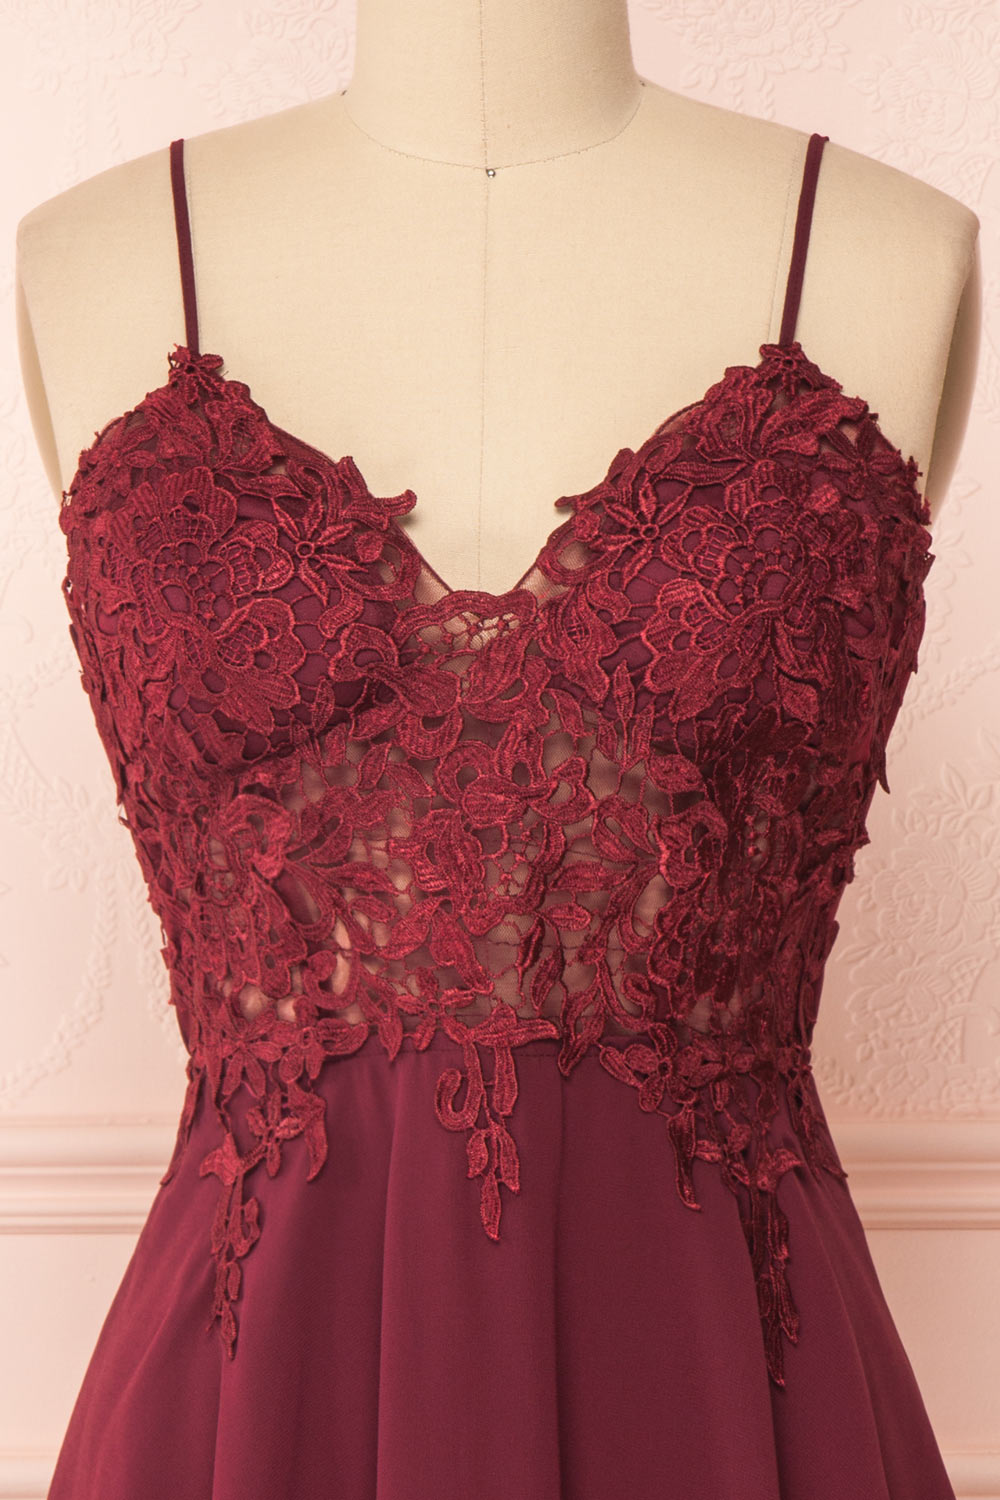 Irena Ruby Burgundy Short Dress w/ Embroidered Mesh | Boutique 1861 front close-up